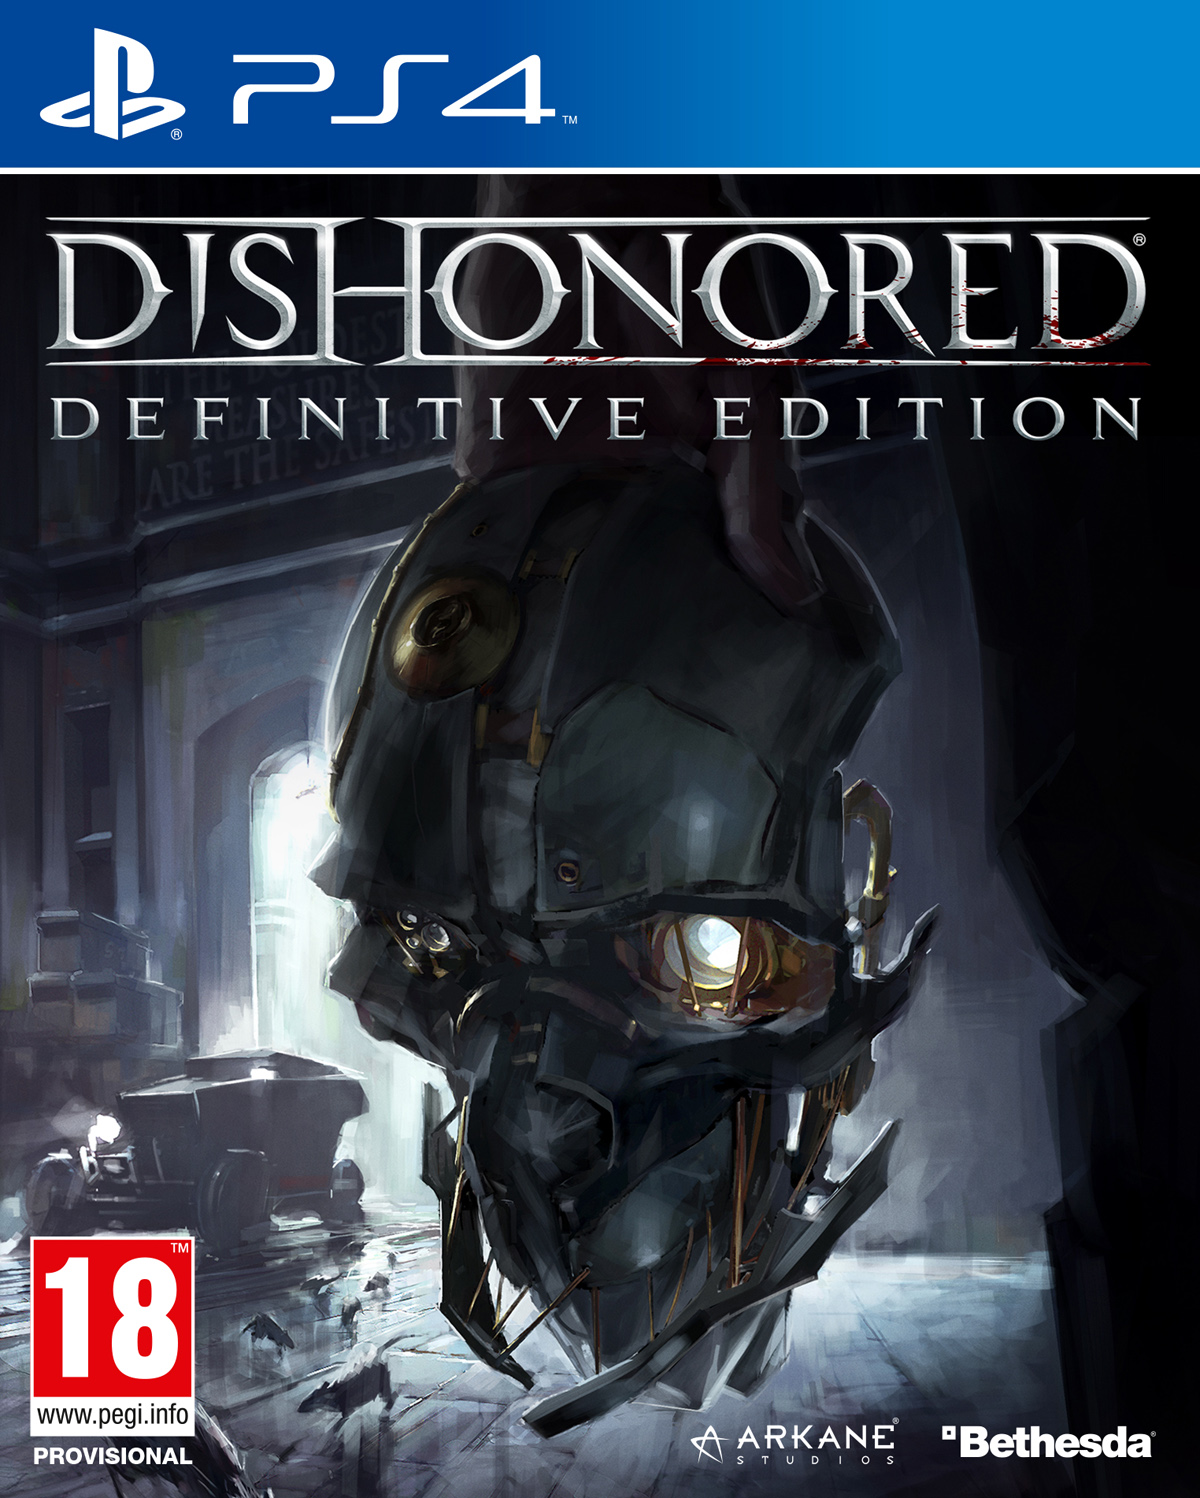 Dishonored - Definitive Edition [PS4] 5.05 / 6.72 / 7.02 [EUR] (2012) [Русский] (v1.01)